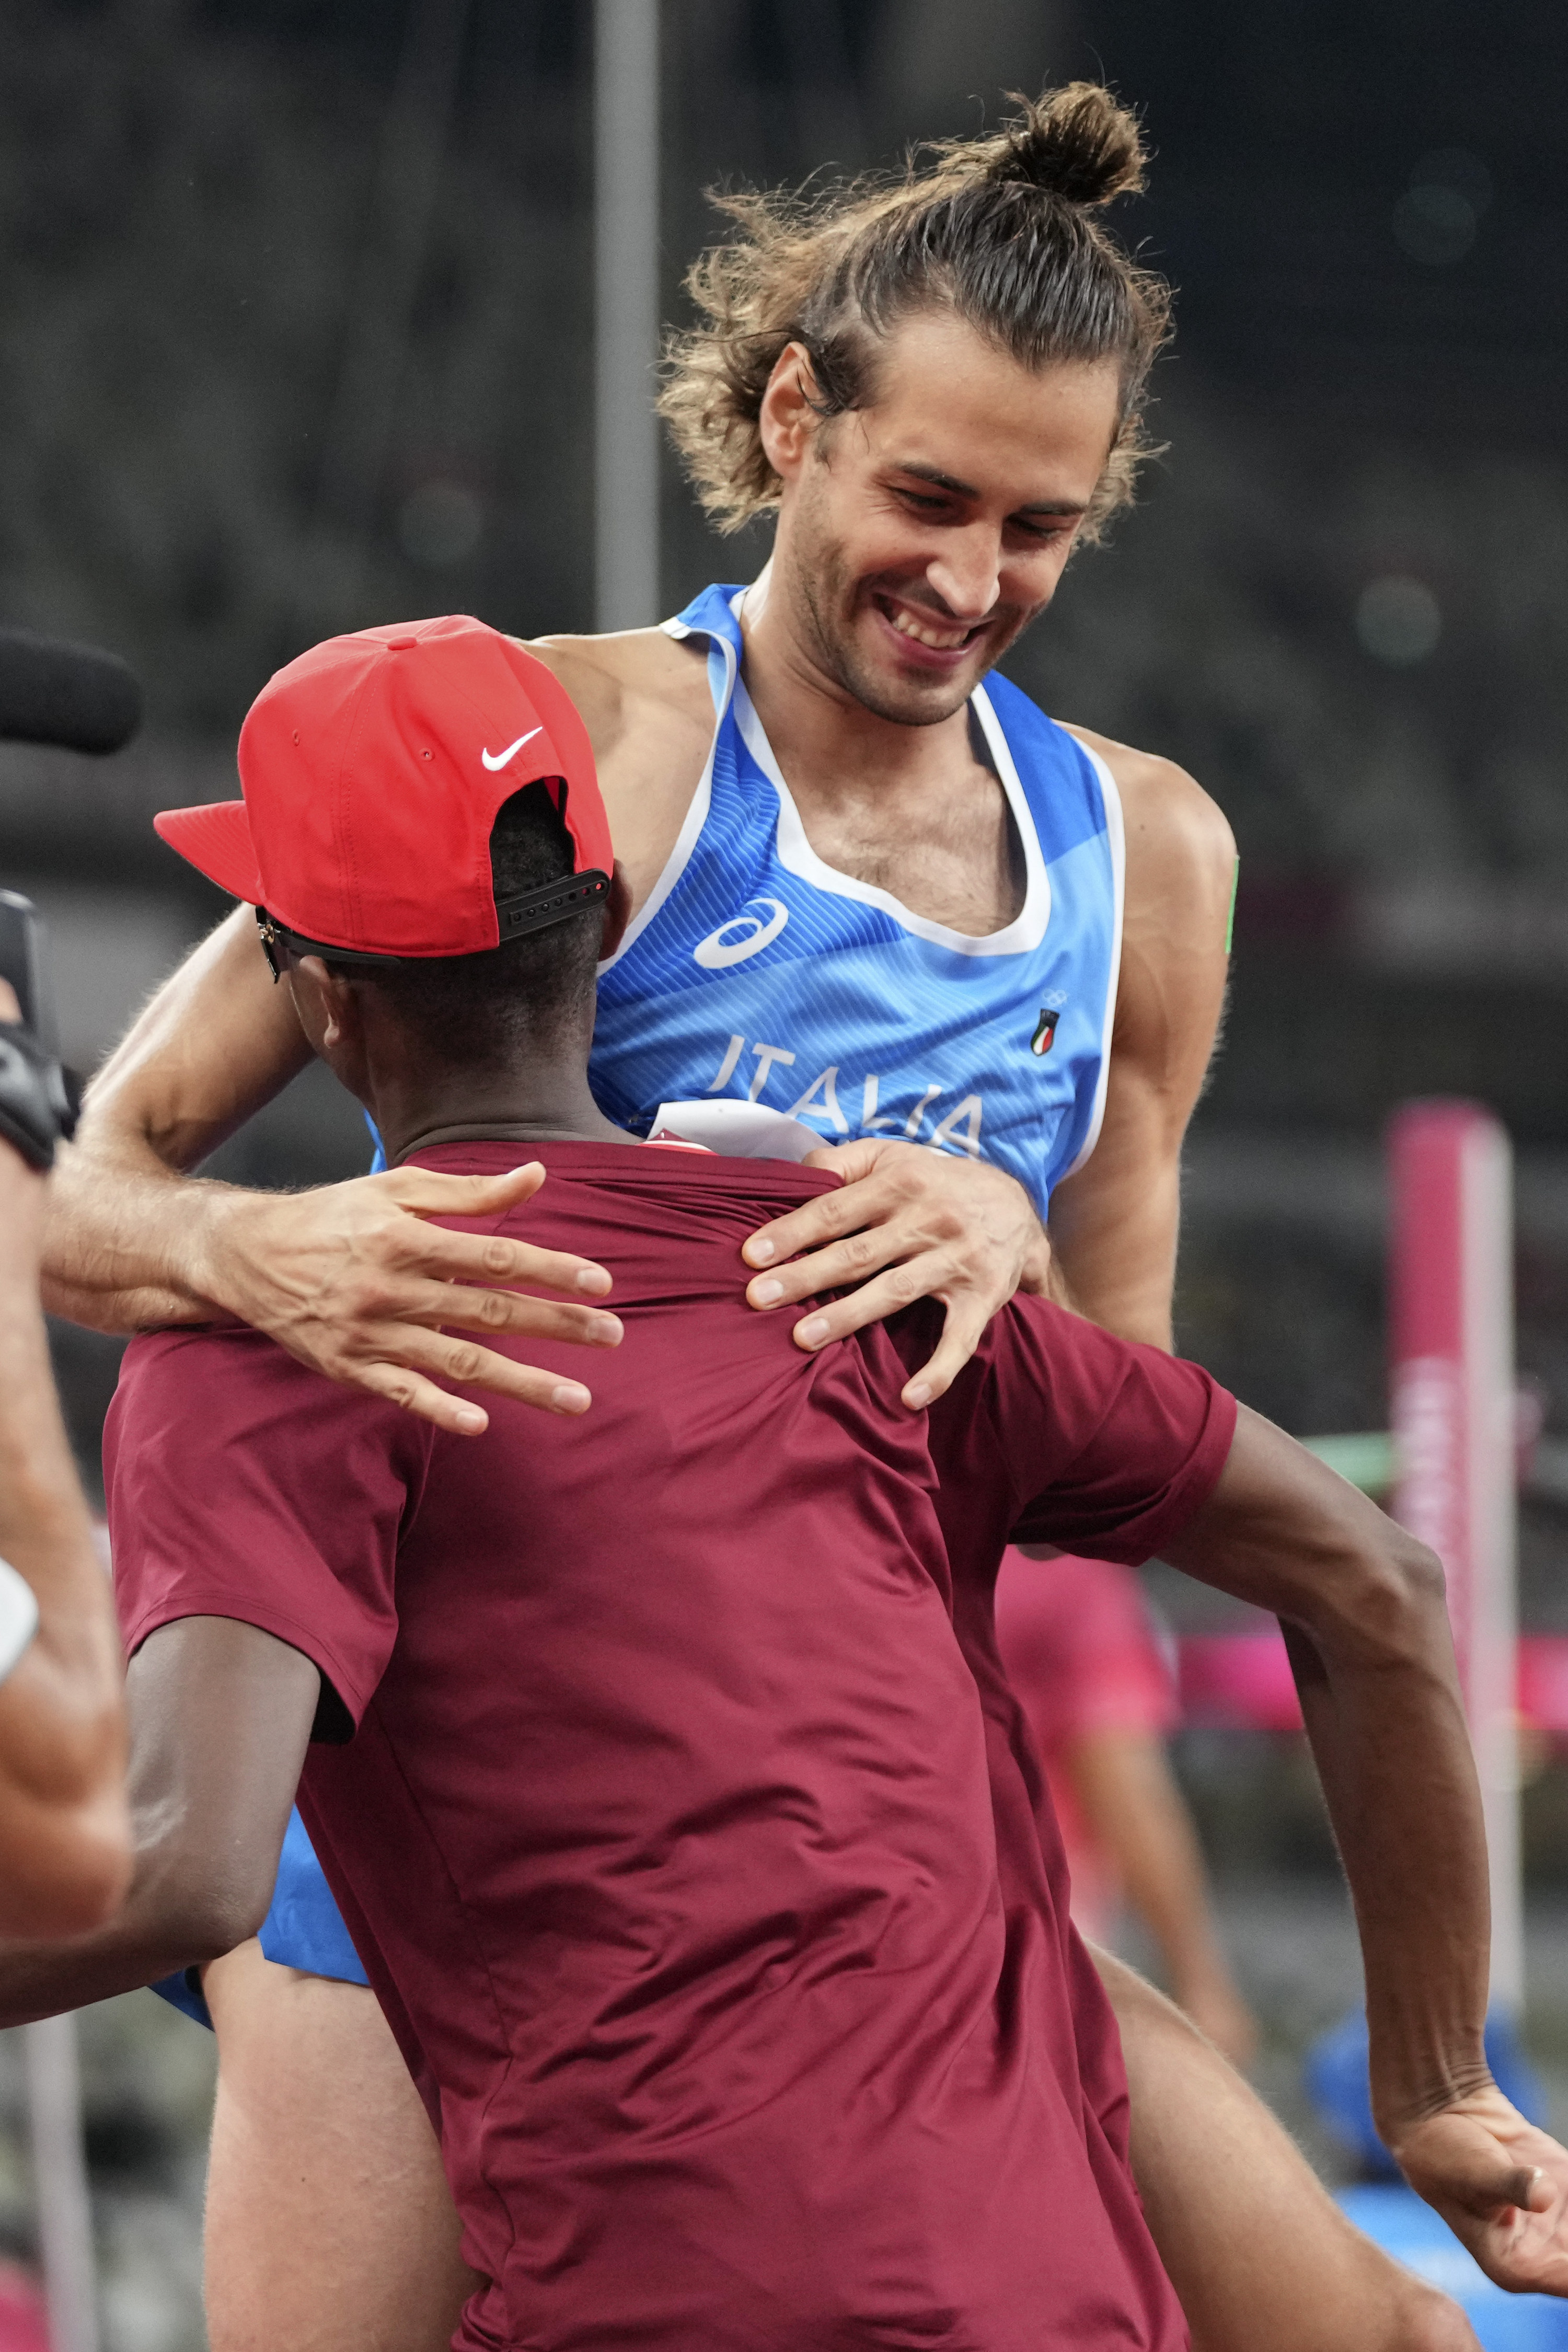 Tamberi smiles as he jumps and holds Barshim by the shoulders